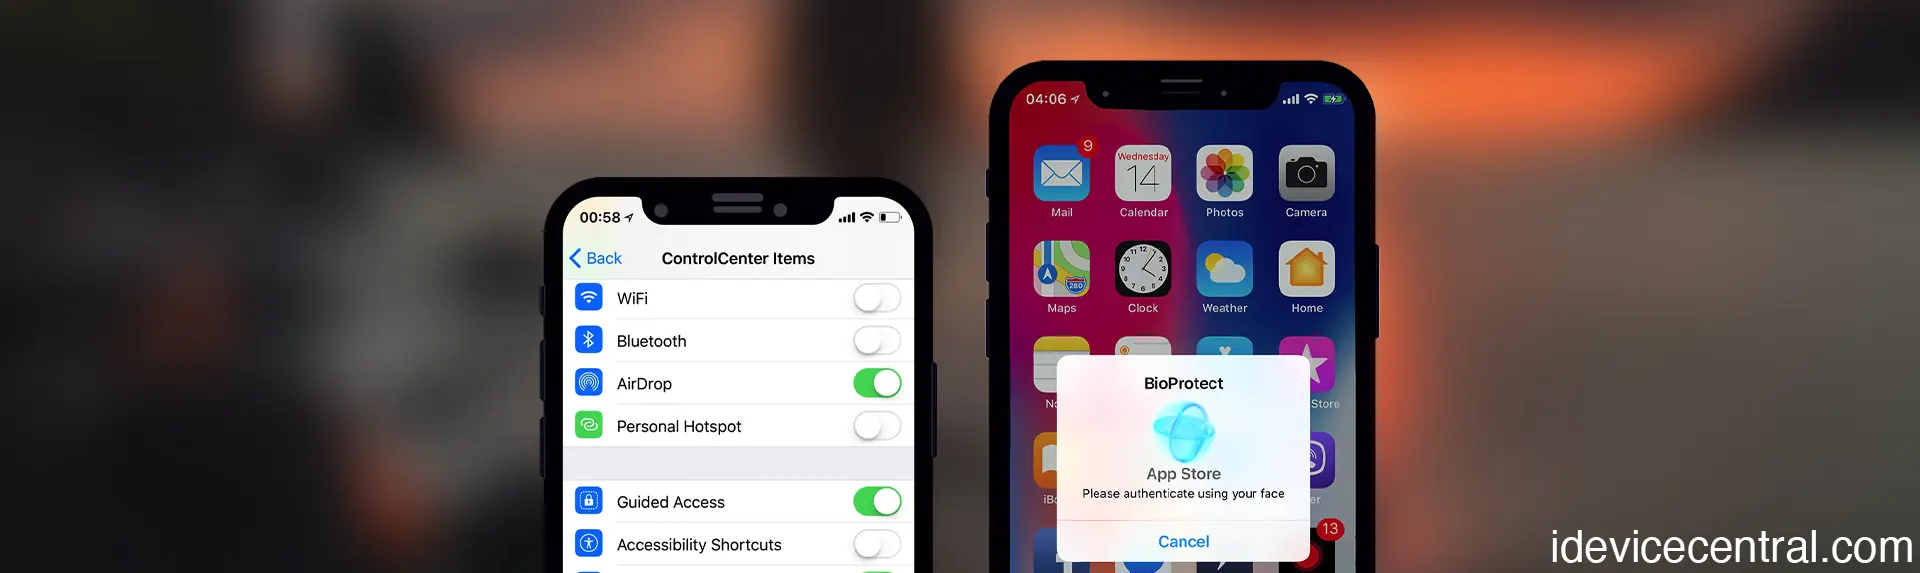 BioProtect XS Tweak: Protect iOS Apps With FaceID / TouchID on iOS 12 – 16